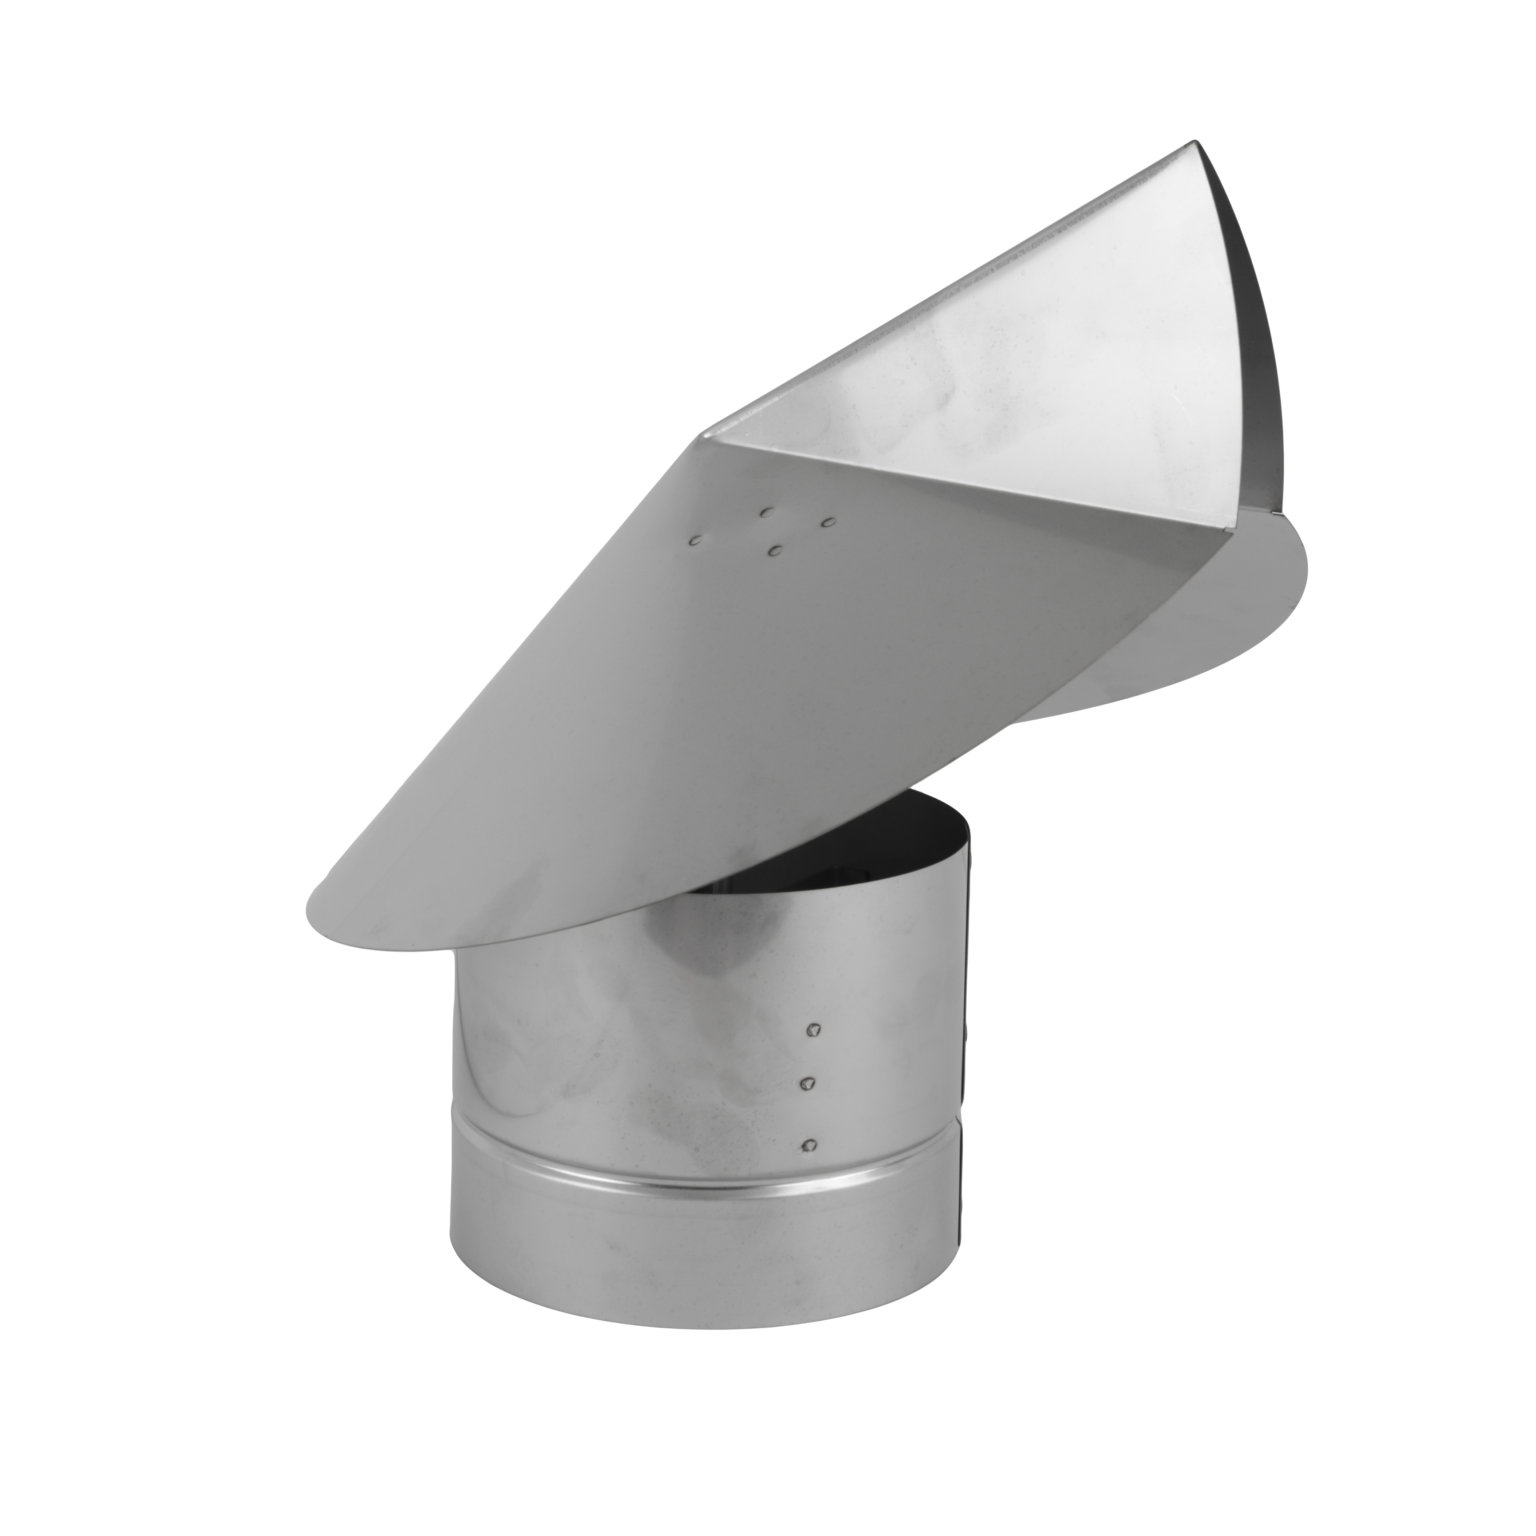 Anti Down Draught Chimney Cowl Flue Fire Top Quality! 